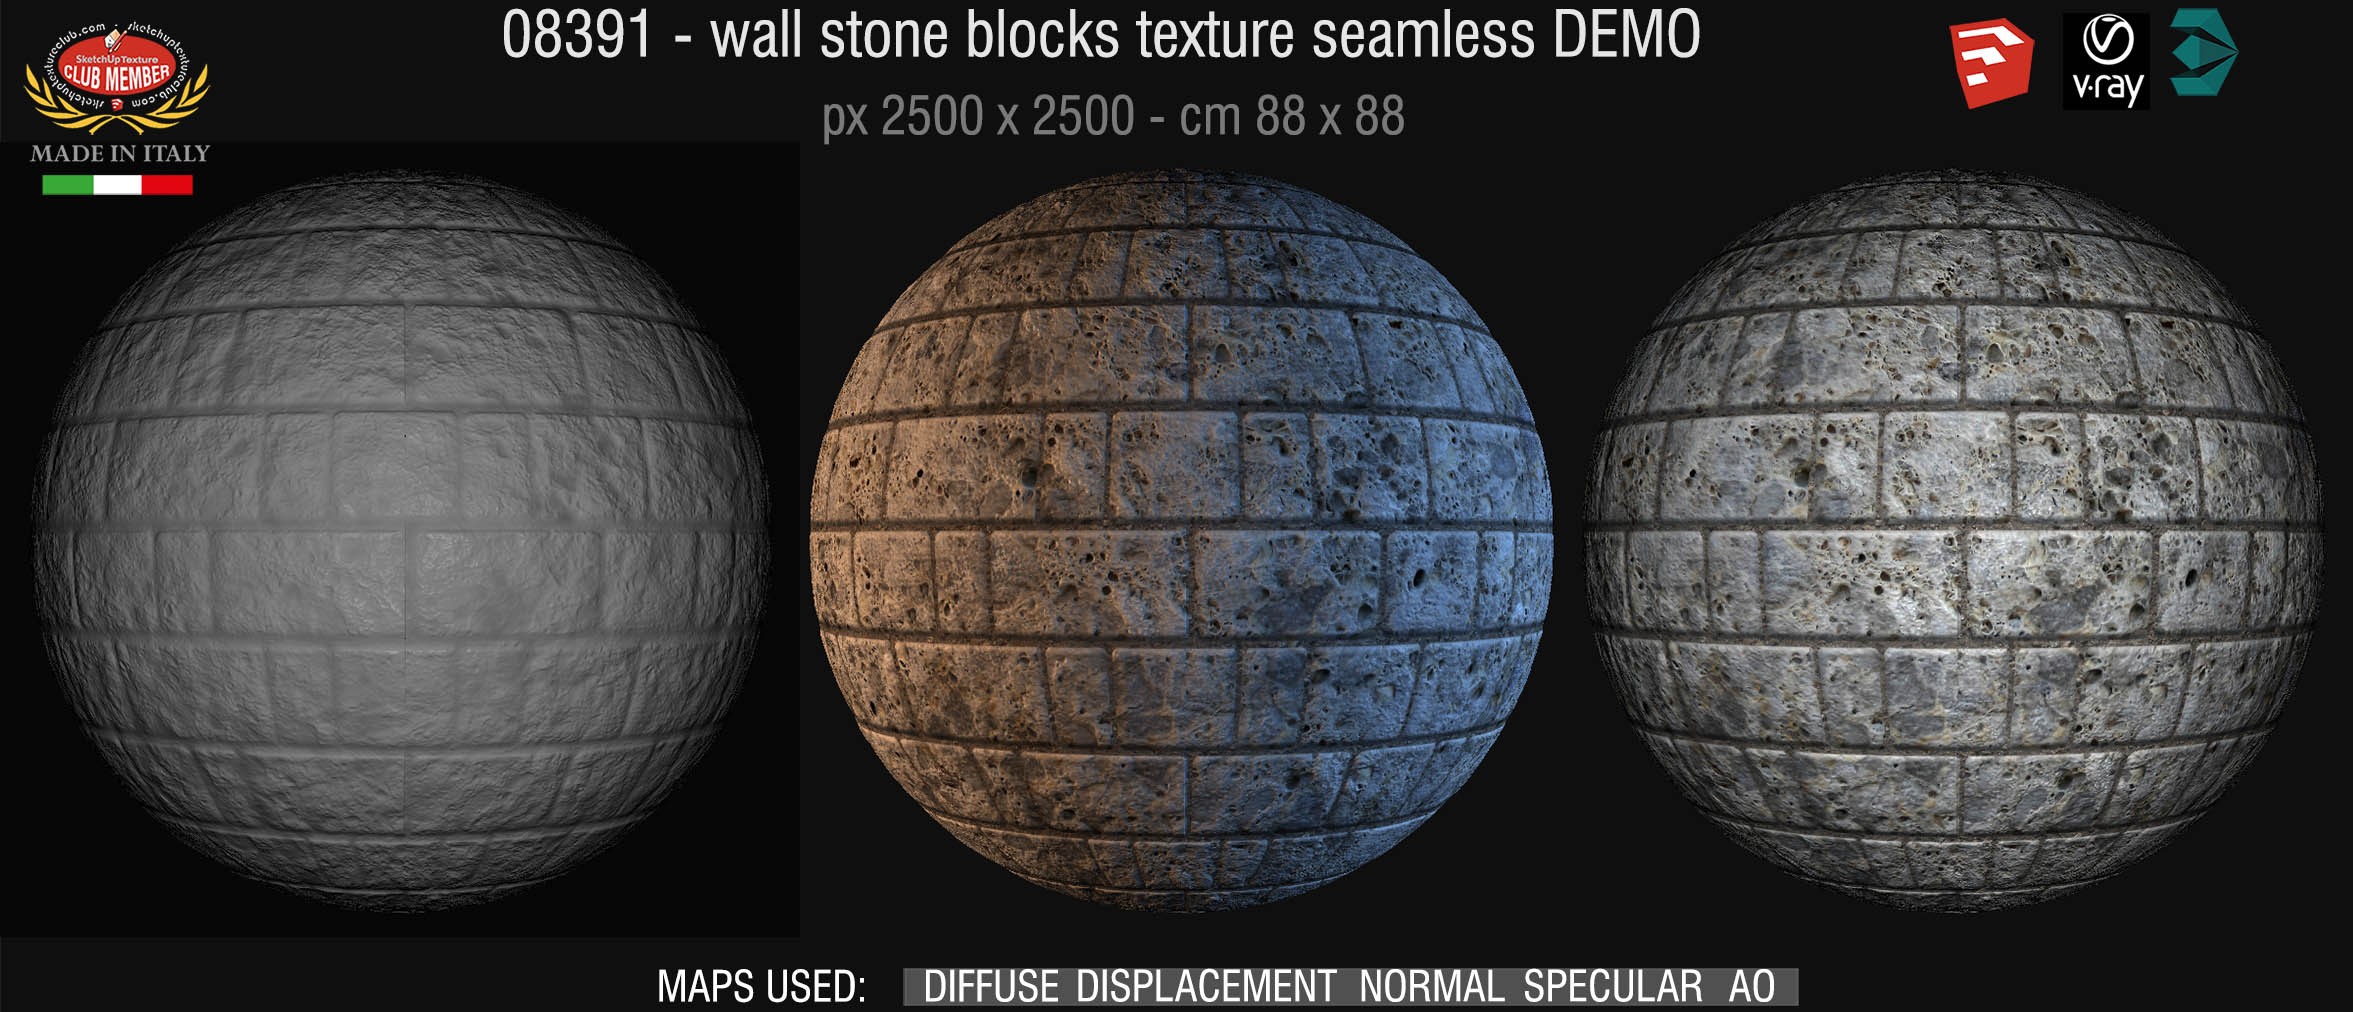 08391 HR Wall stone with regular blocks texture + maps DEMO